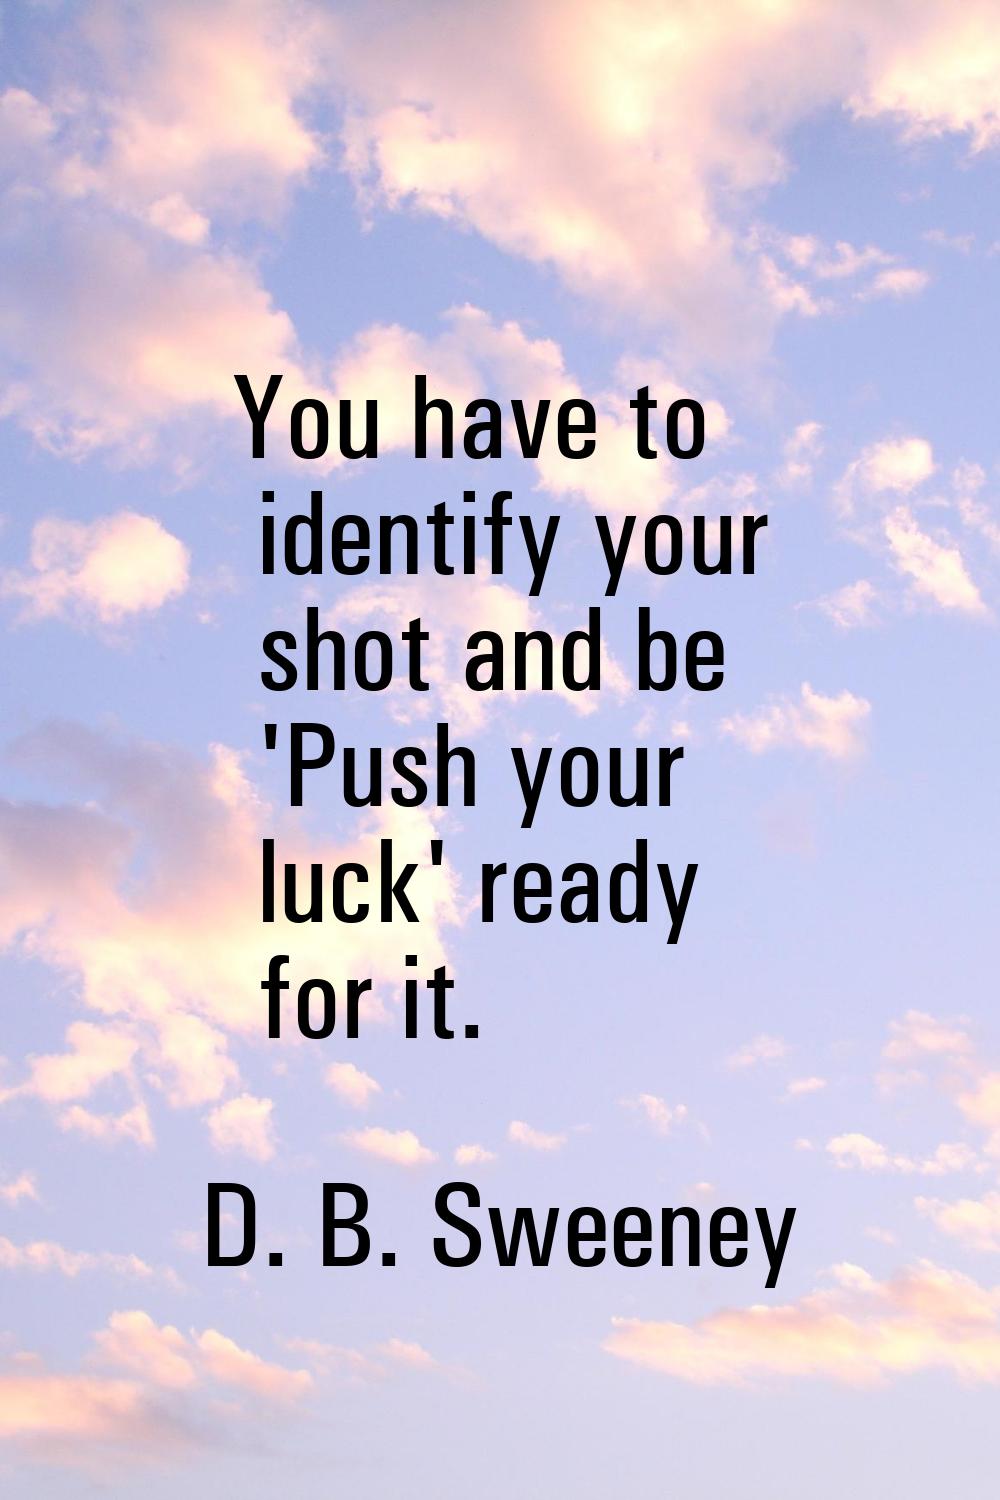 You have to identify your shot and be 'Push your luck' ready for it.